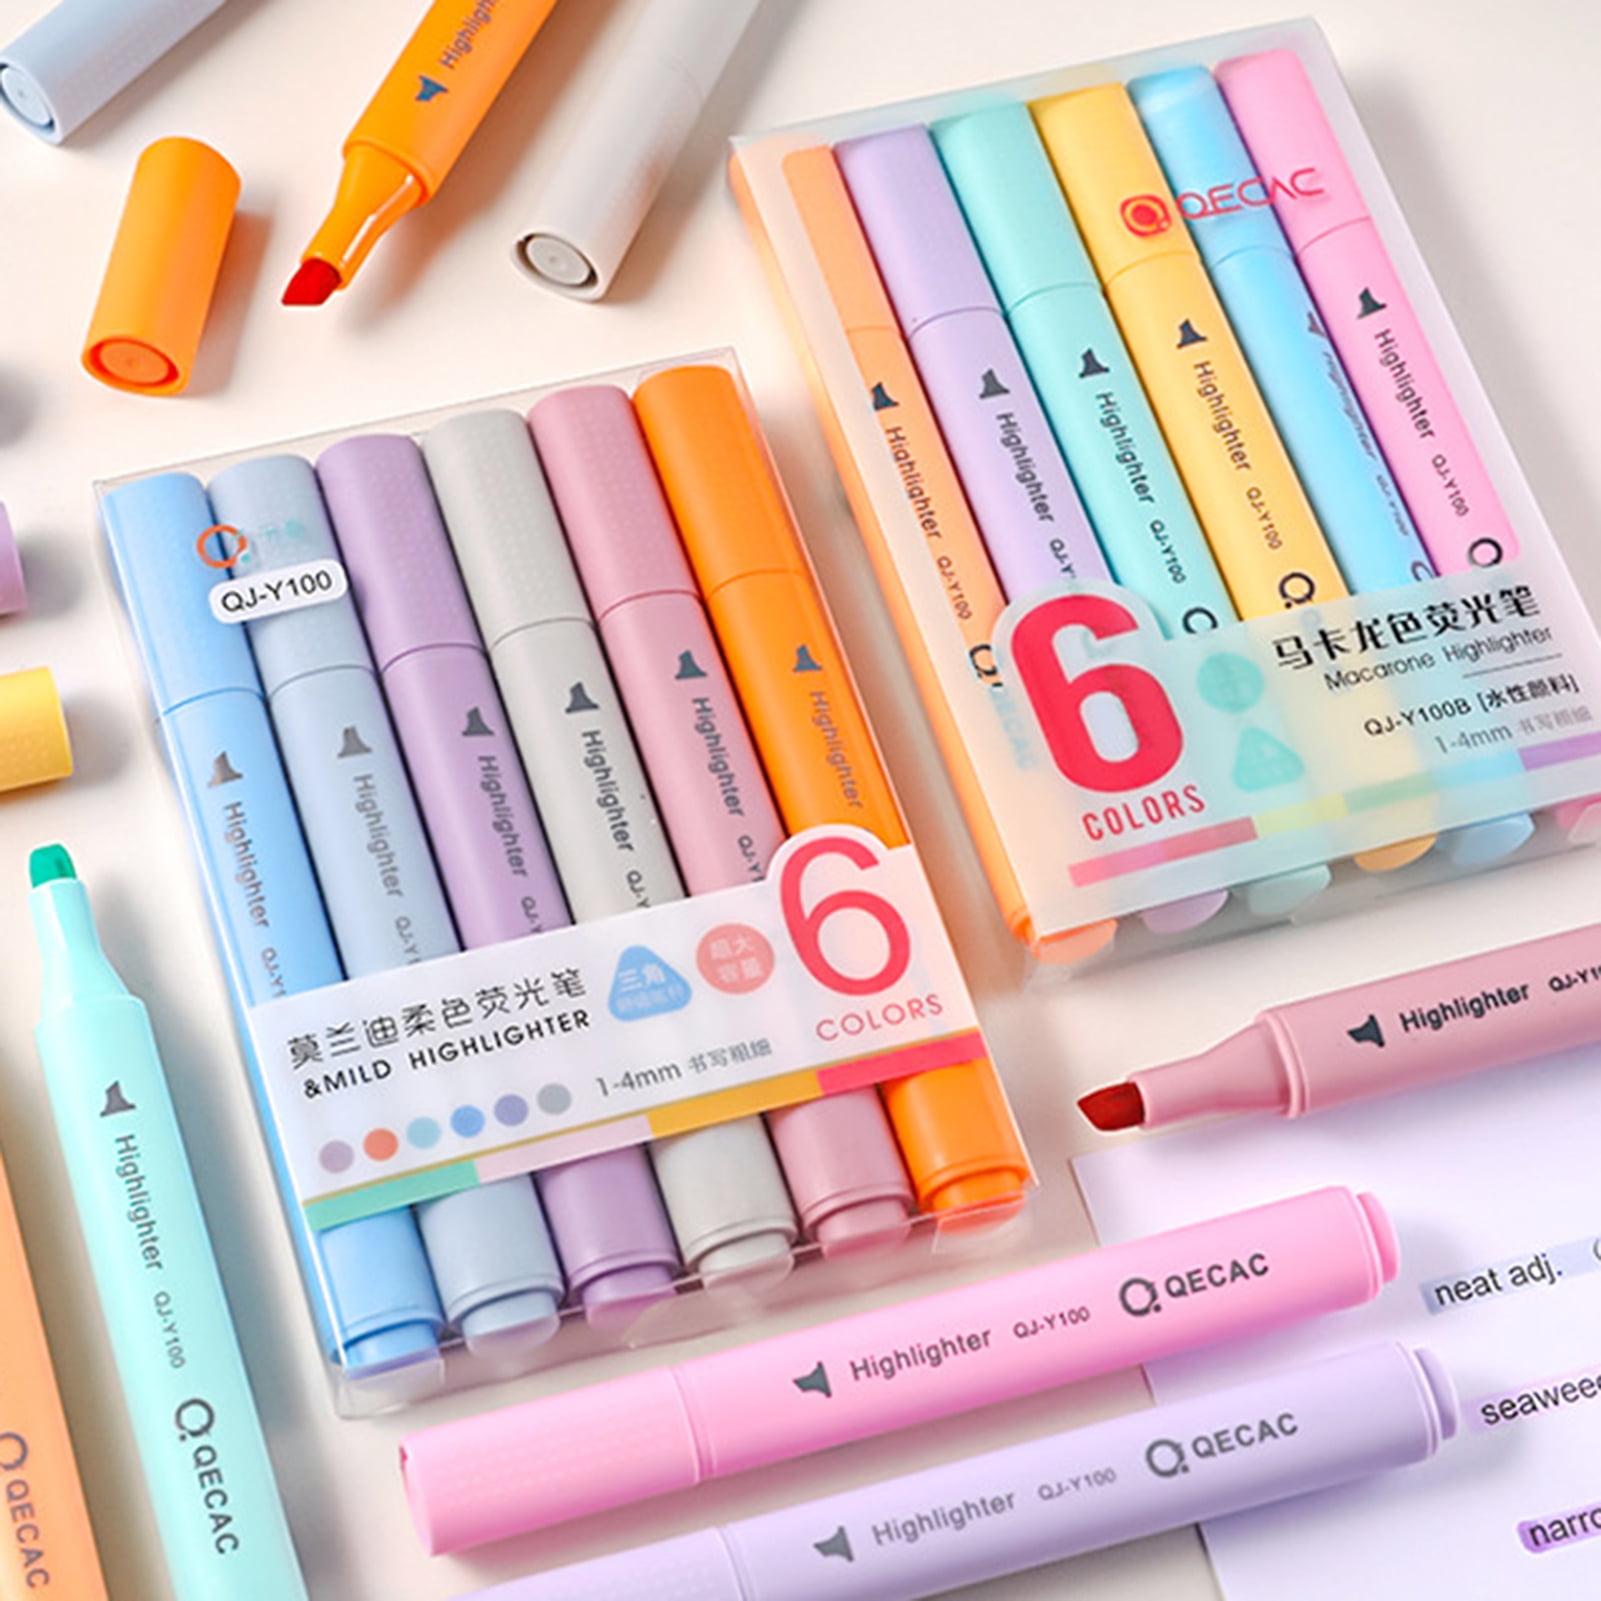  Tofficu 6pcs Highlighter Color Pens for Note Taking Highlight  Marker Pen Book Marker Portable Marking Pen Painting Paint Marker Pens  Daily Supplies Stationery Work Literature and Art Abs : Office